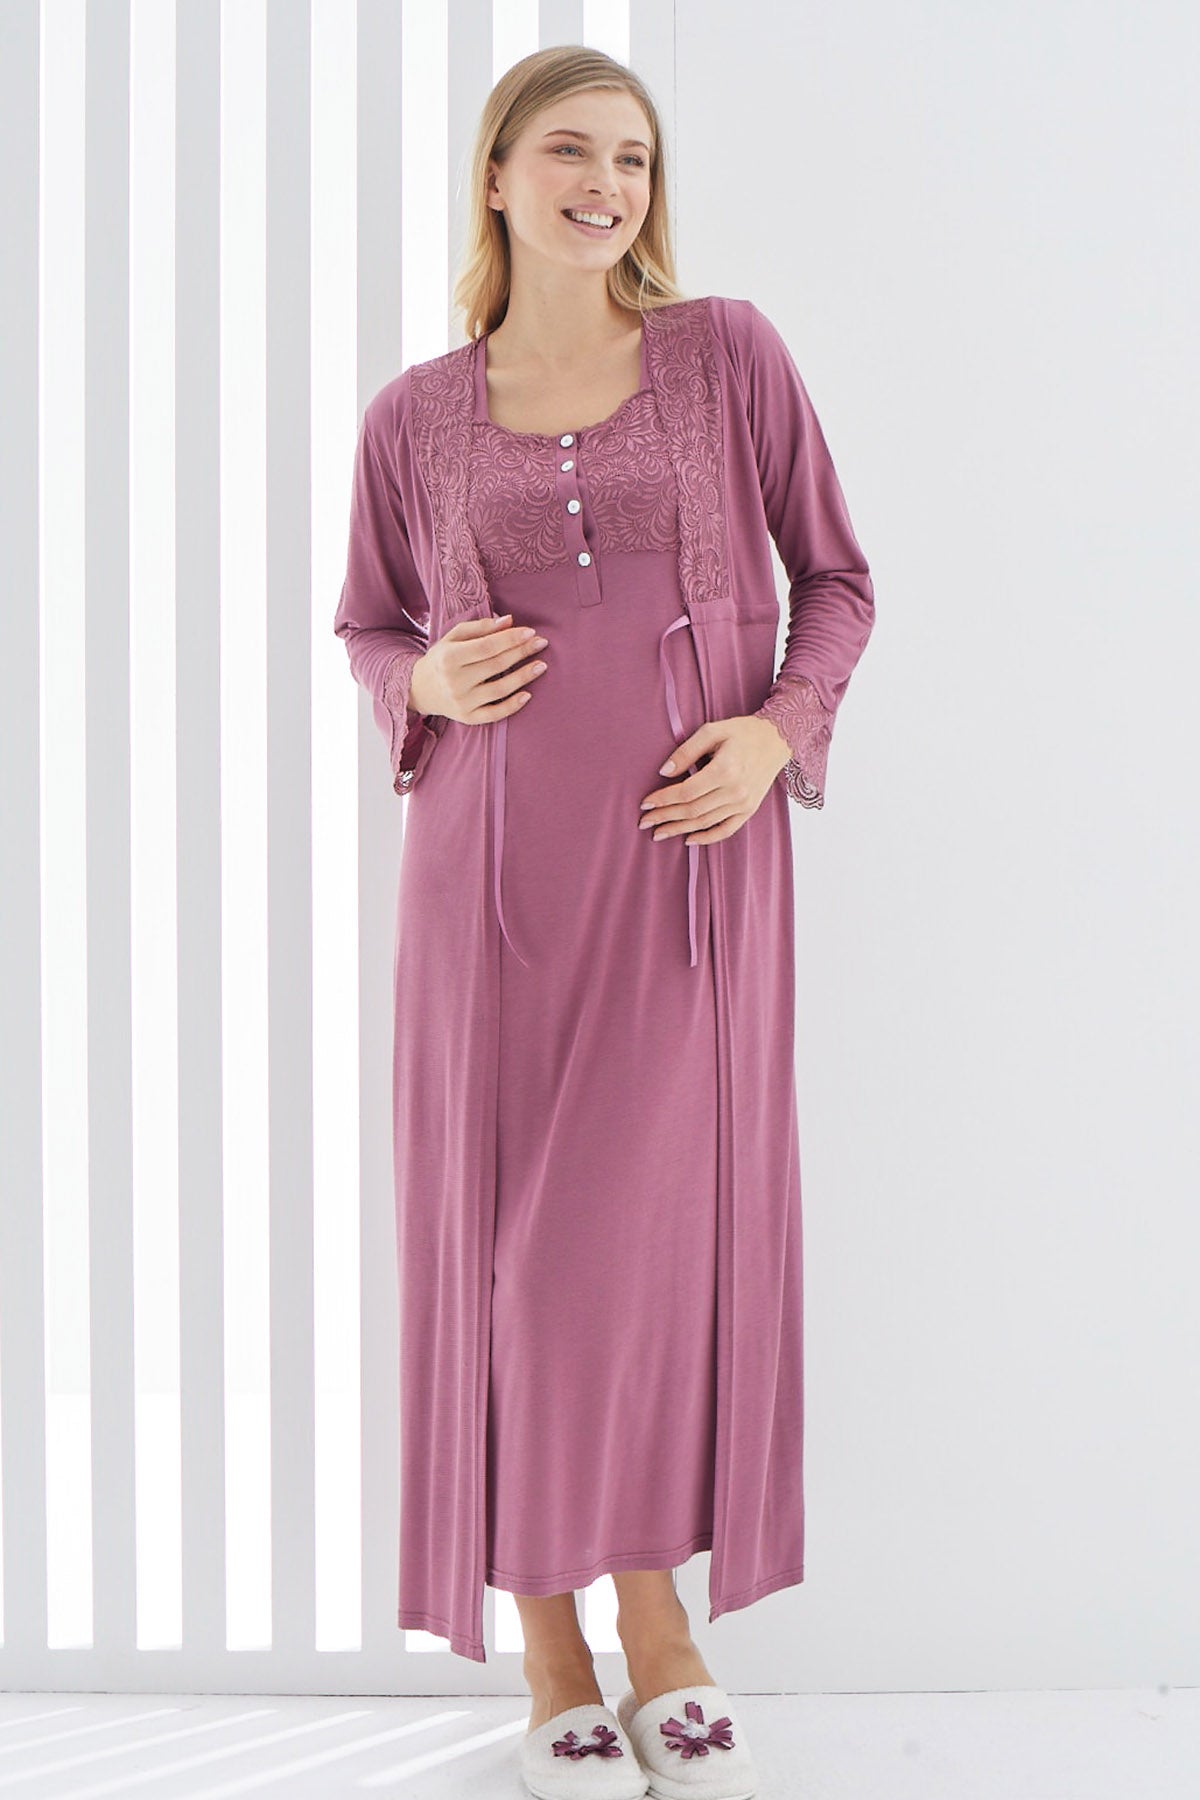 Shopymommy 2267 Maternity & Nursing Nightgown With Lace Sleeve Robe Plum